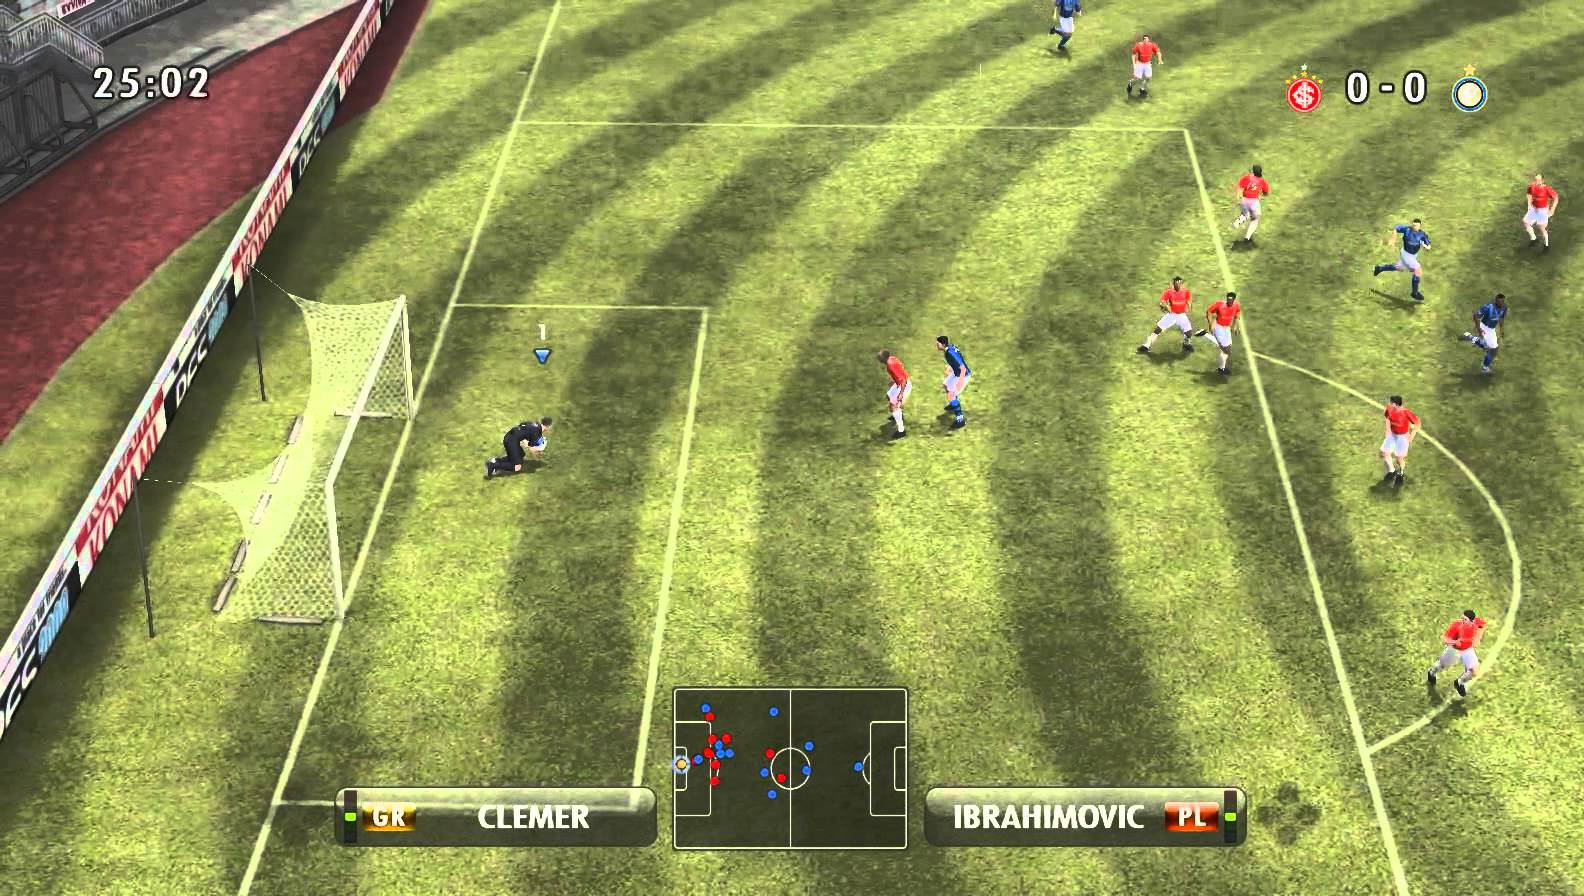 pes 2008 full version for pc portable